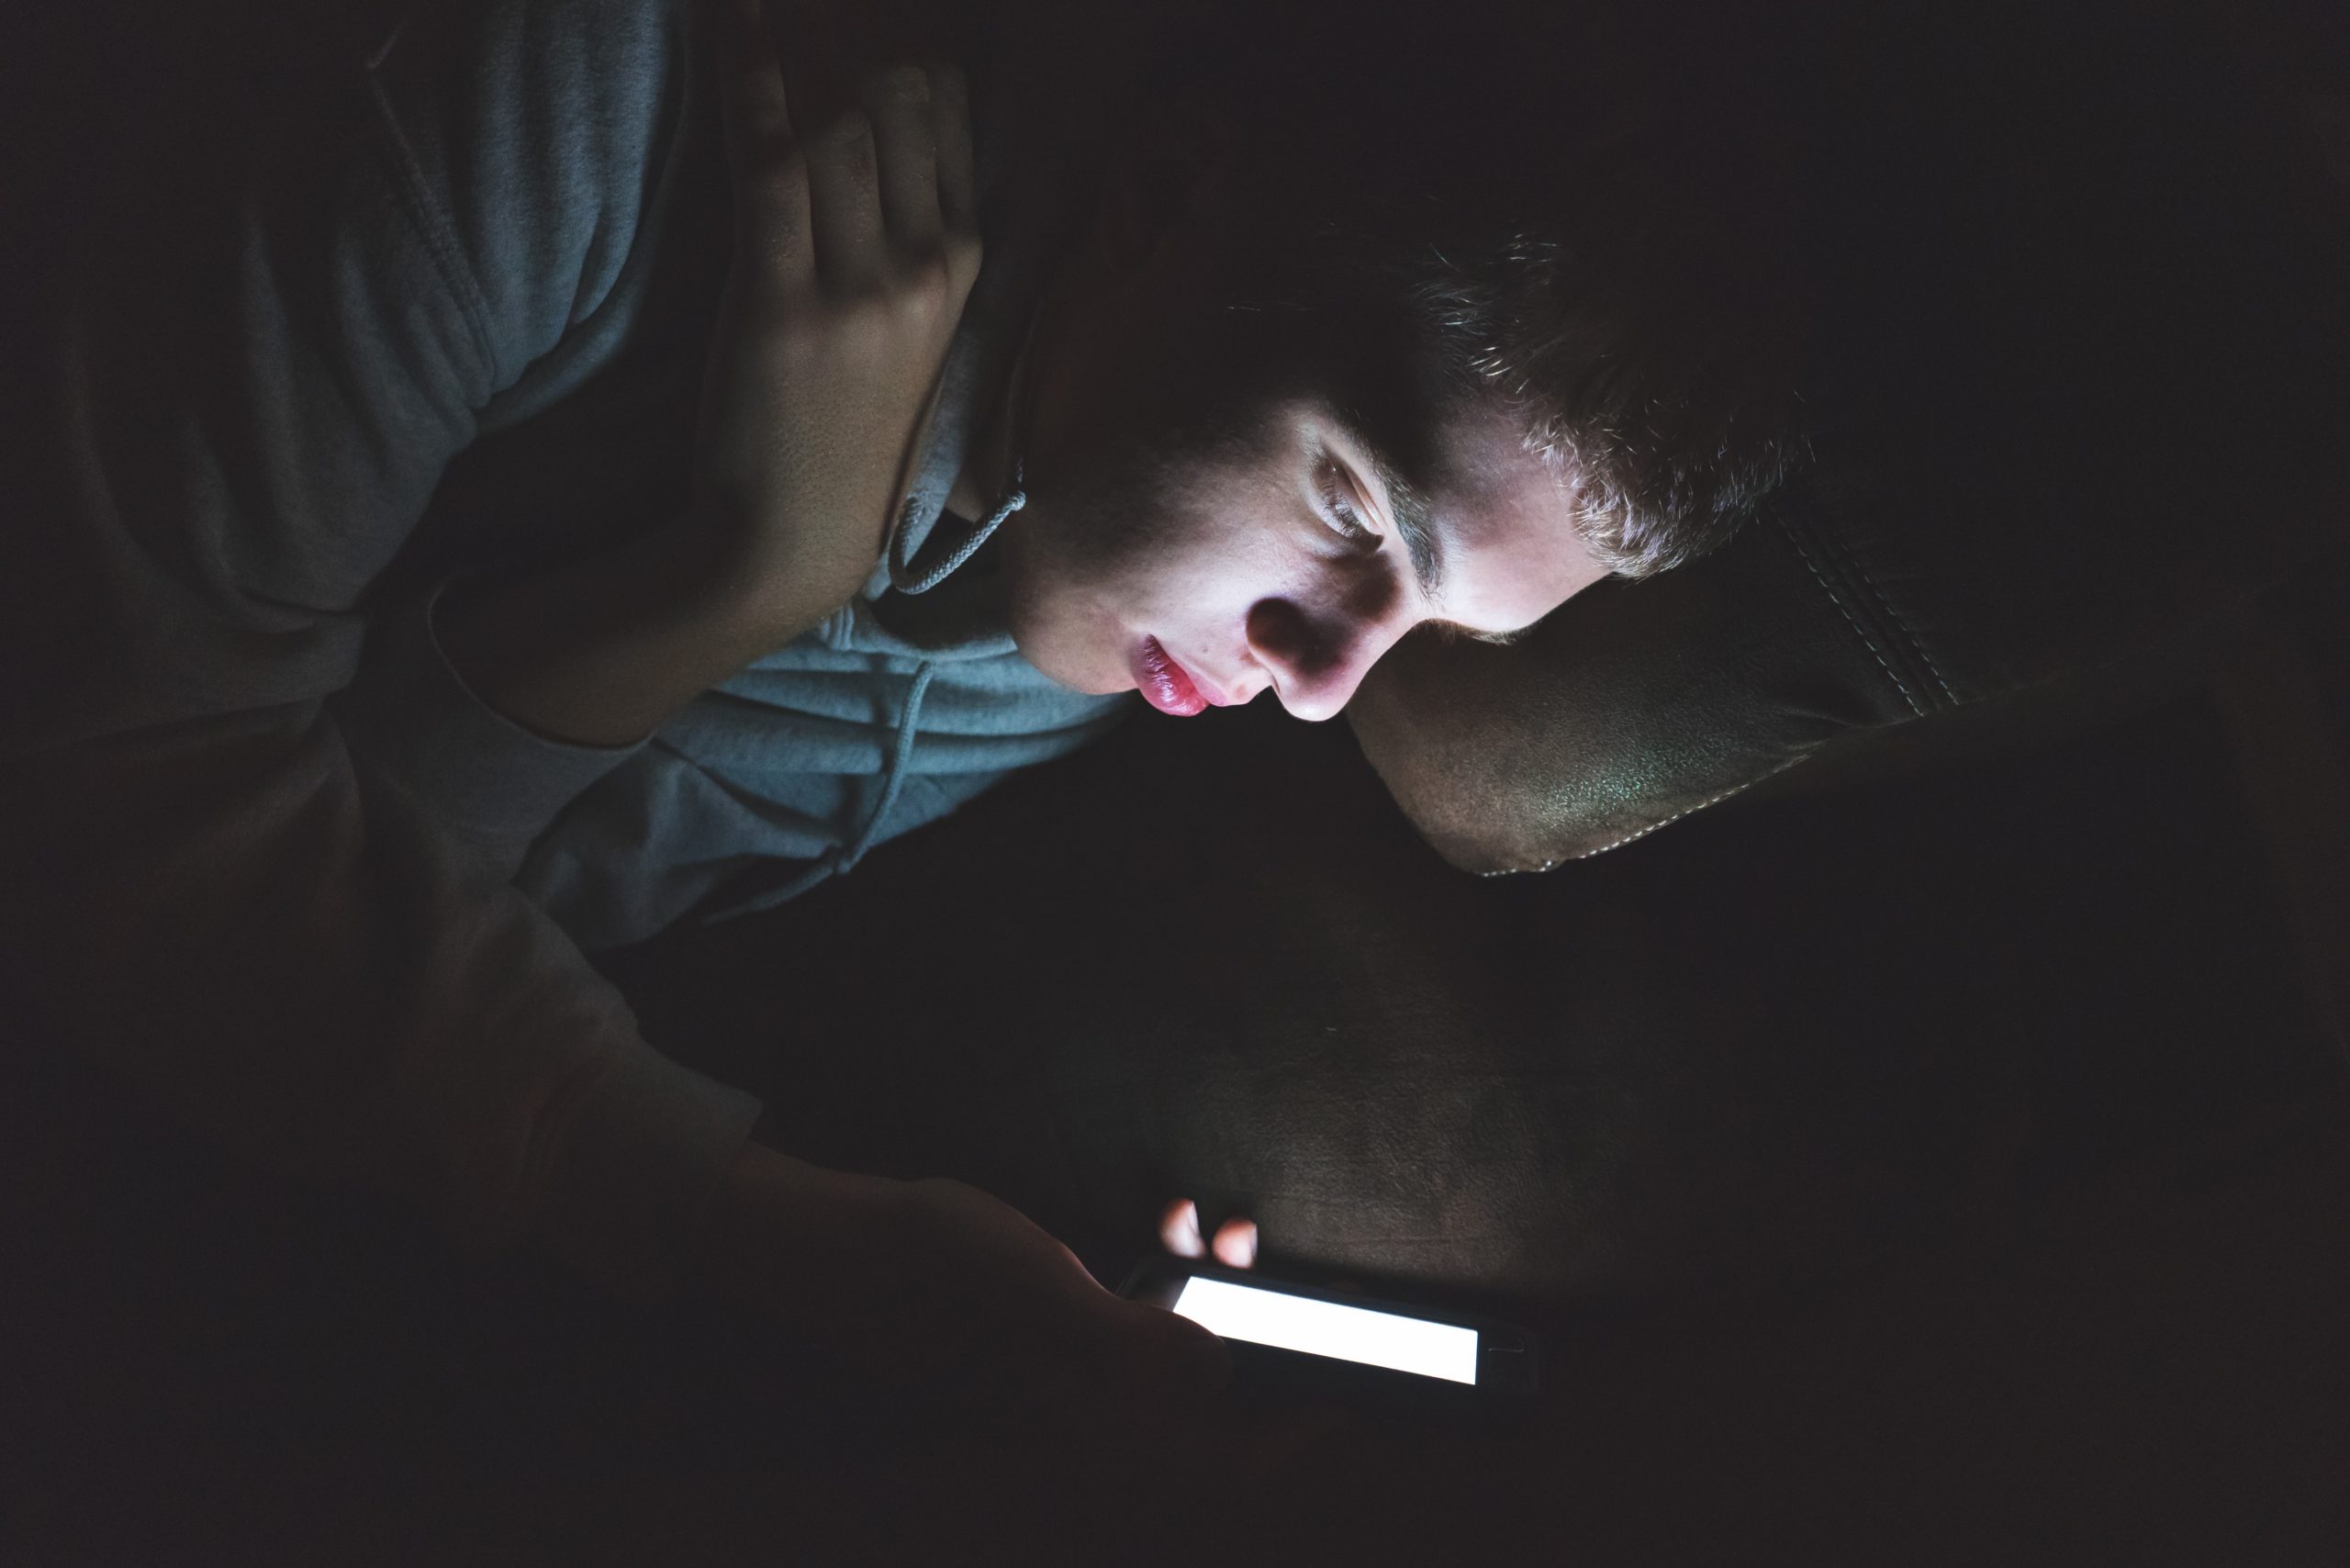 Teenager on his smartphone in the dark.